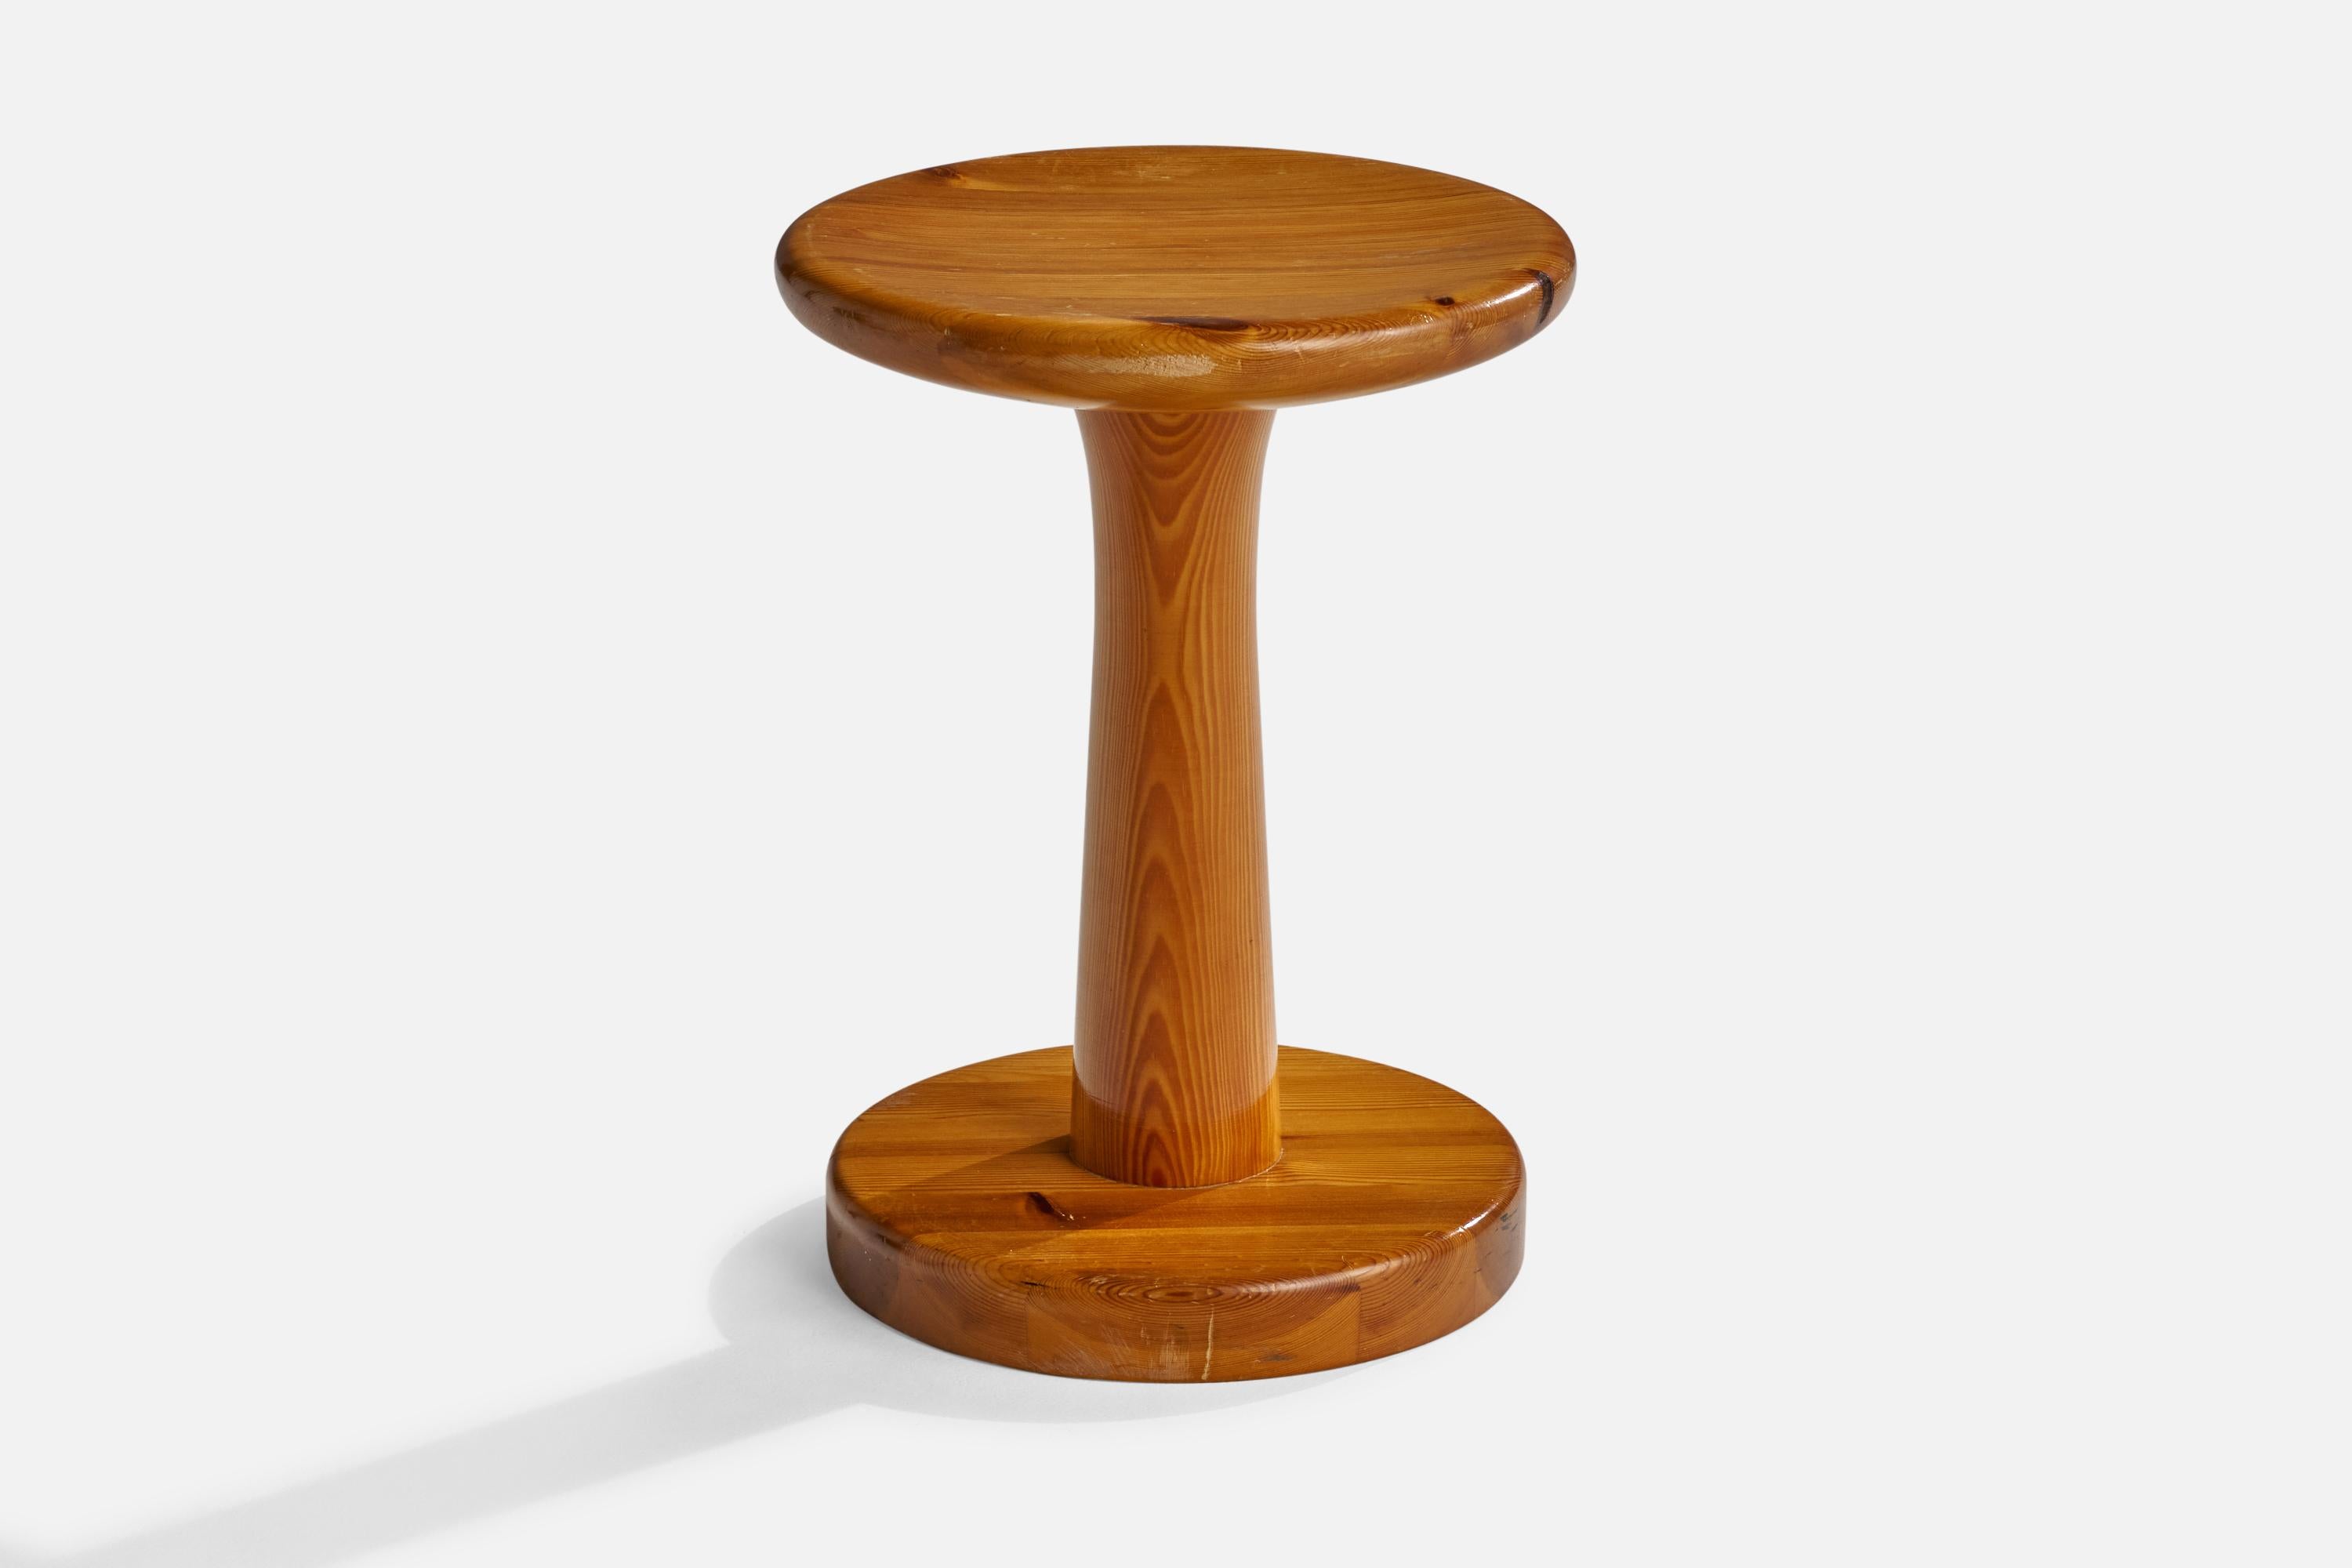 A pine stool designed and produced in Sweden, 1970s.

Seat height 17.75”